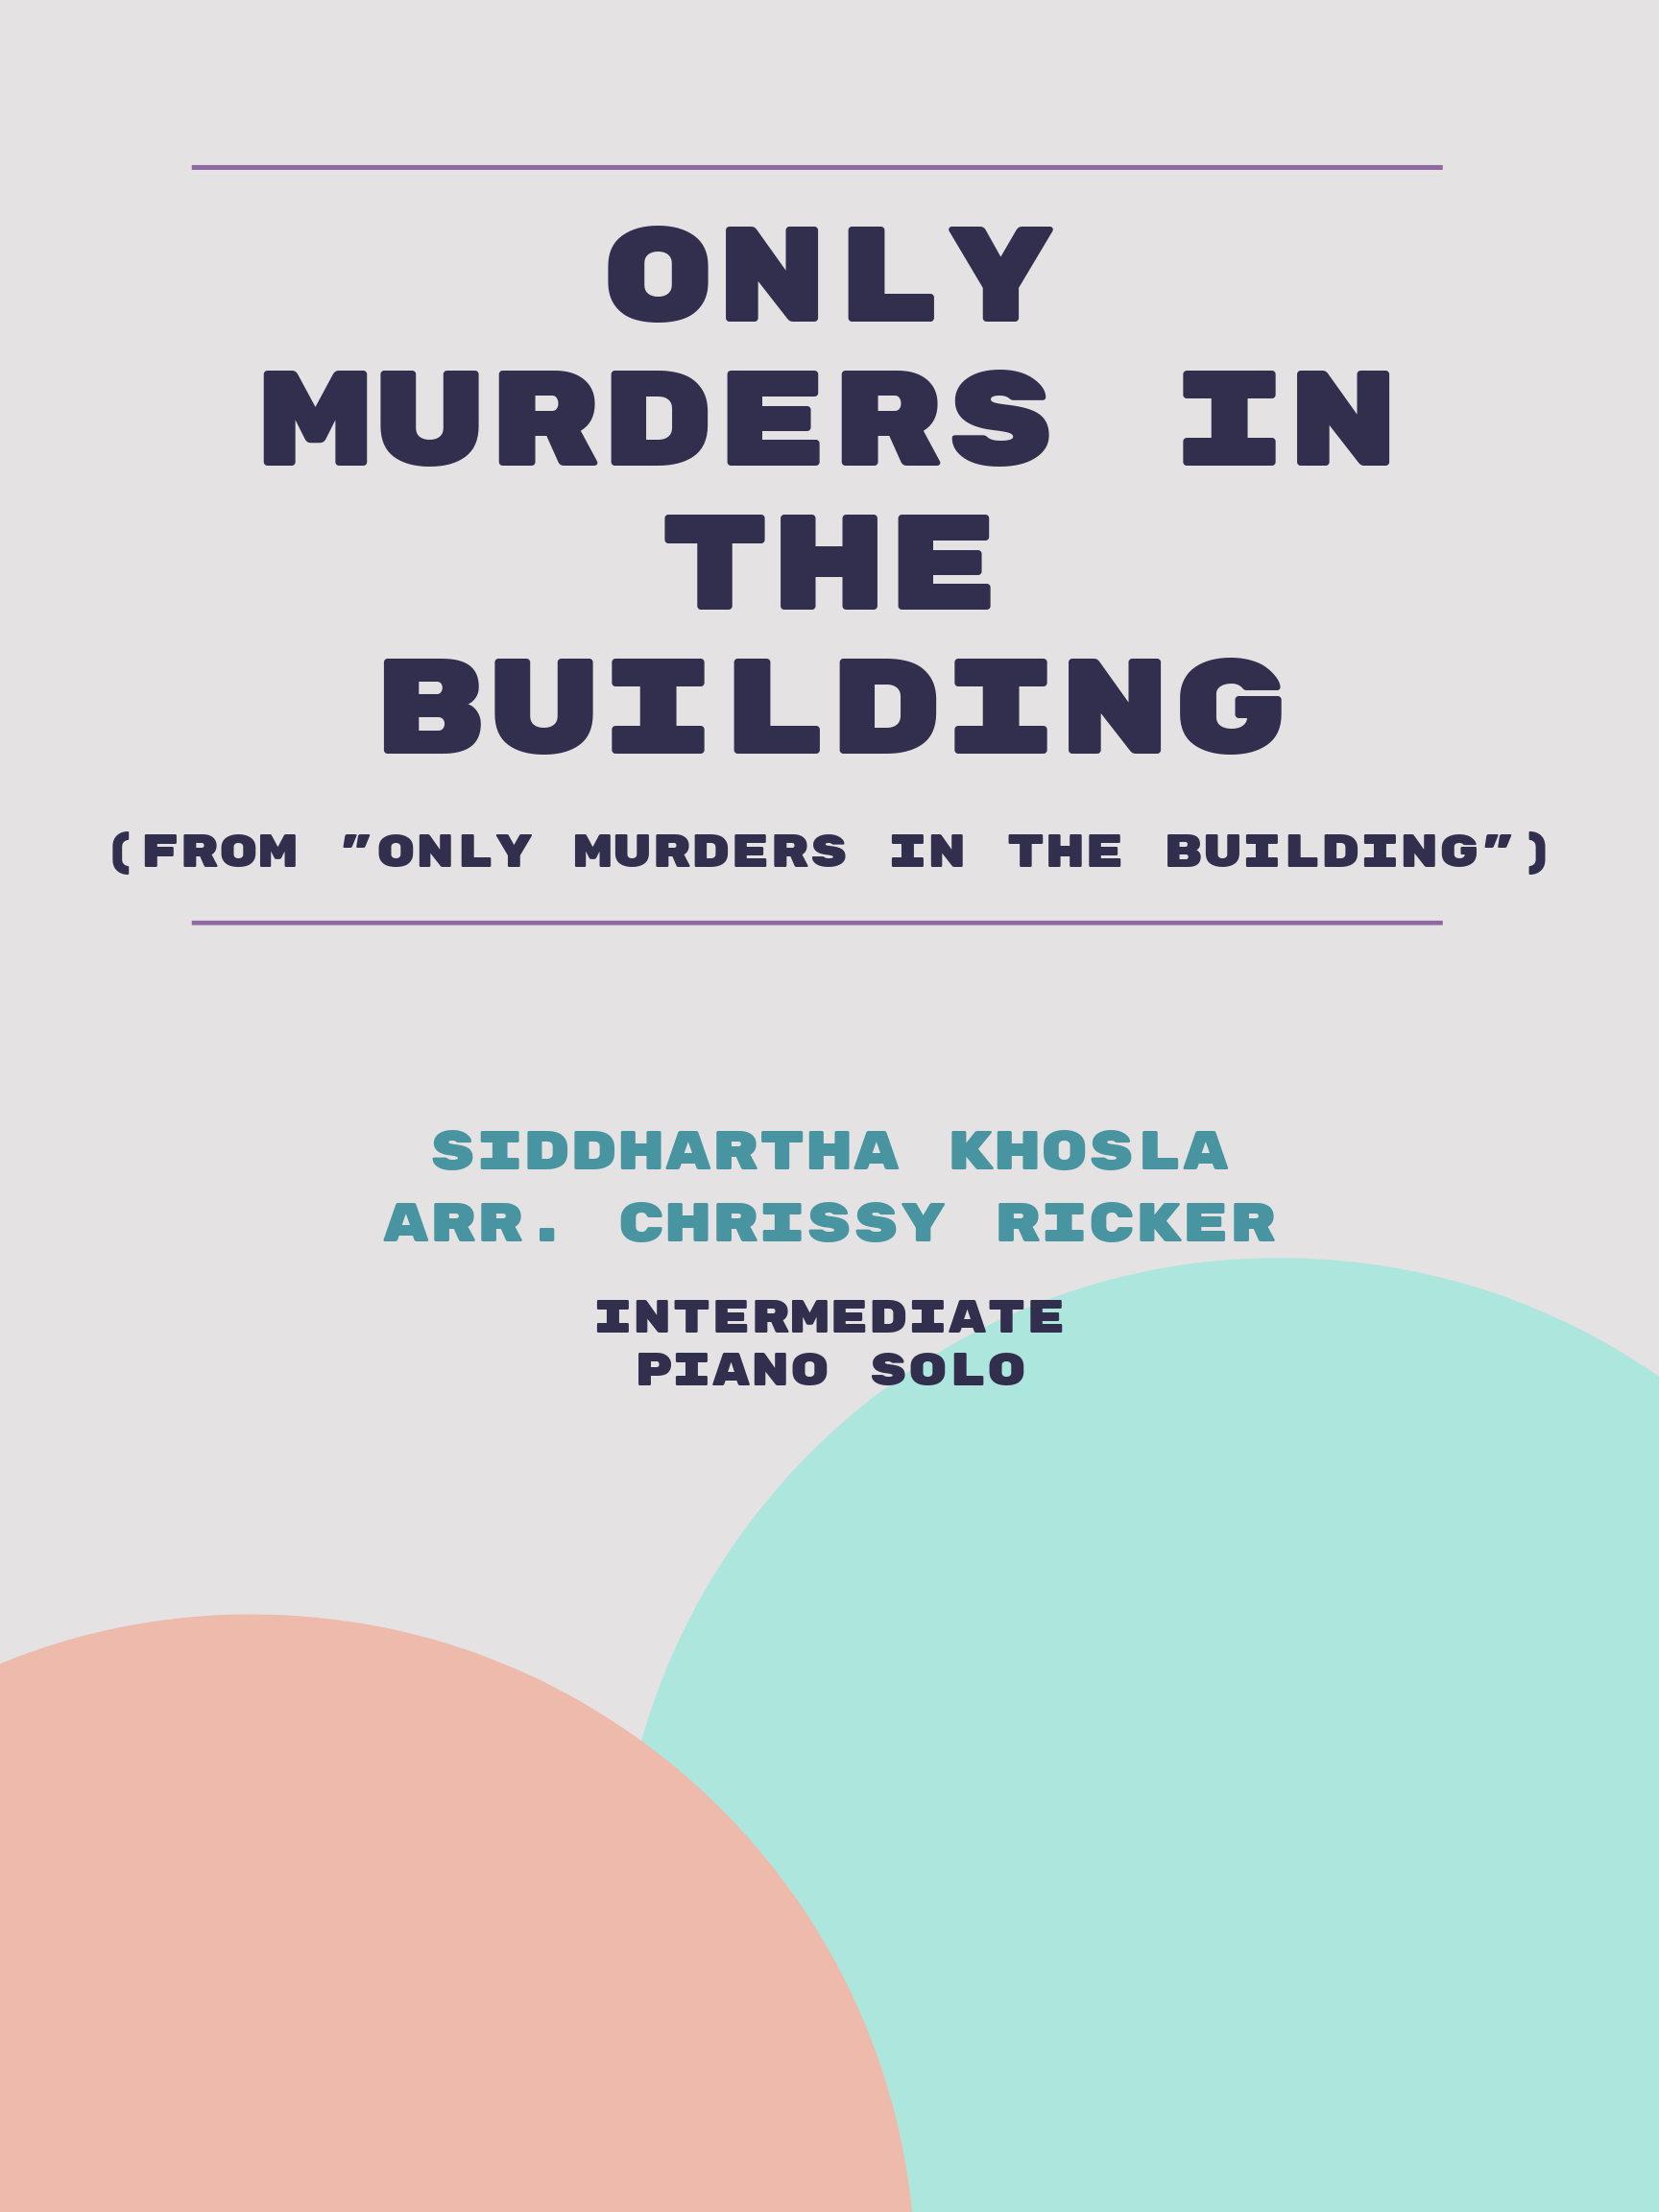 Only Murders in the Building by Siddhartha Khosla